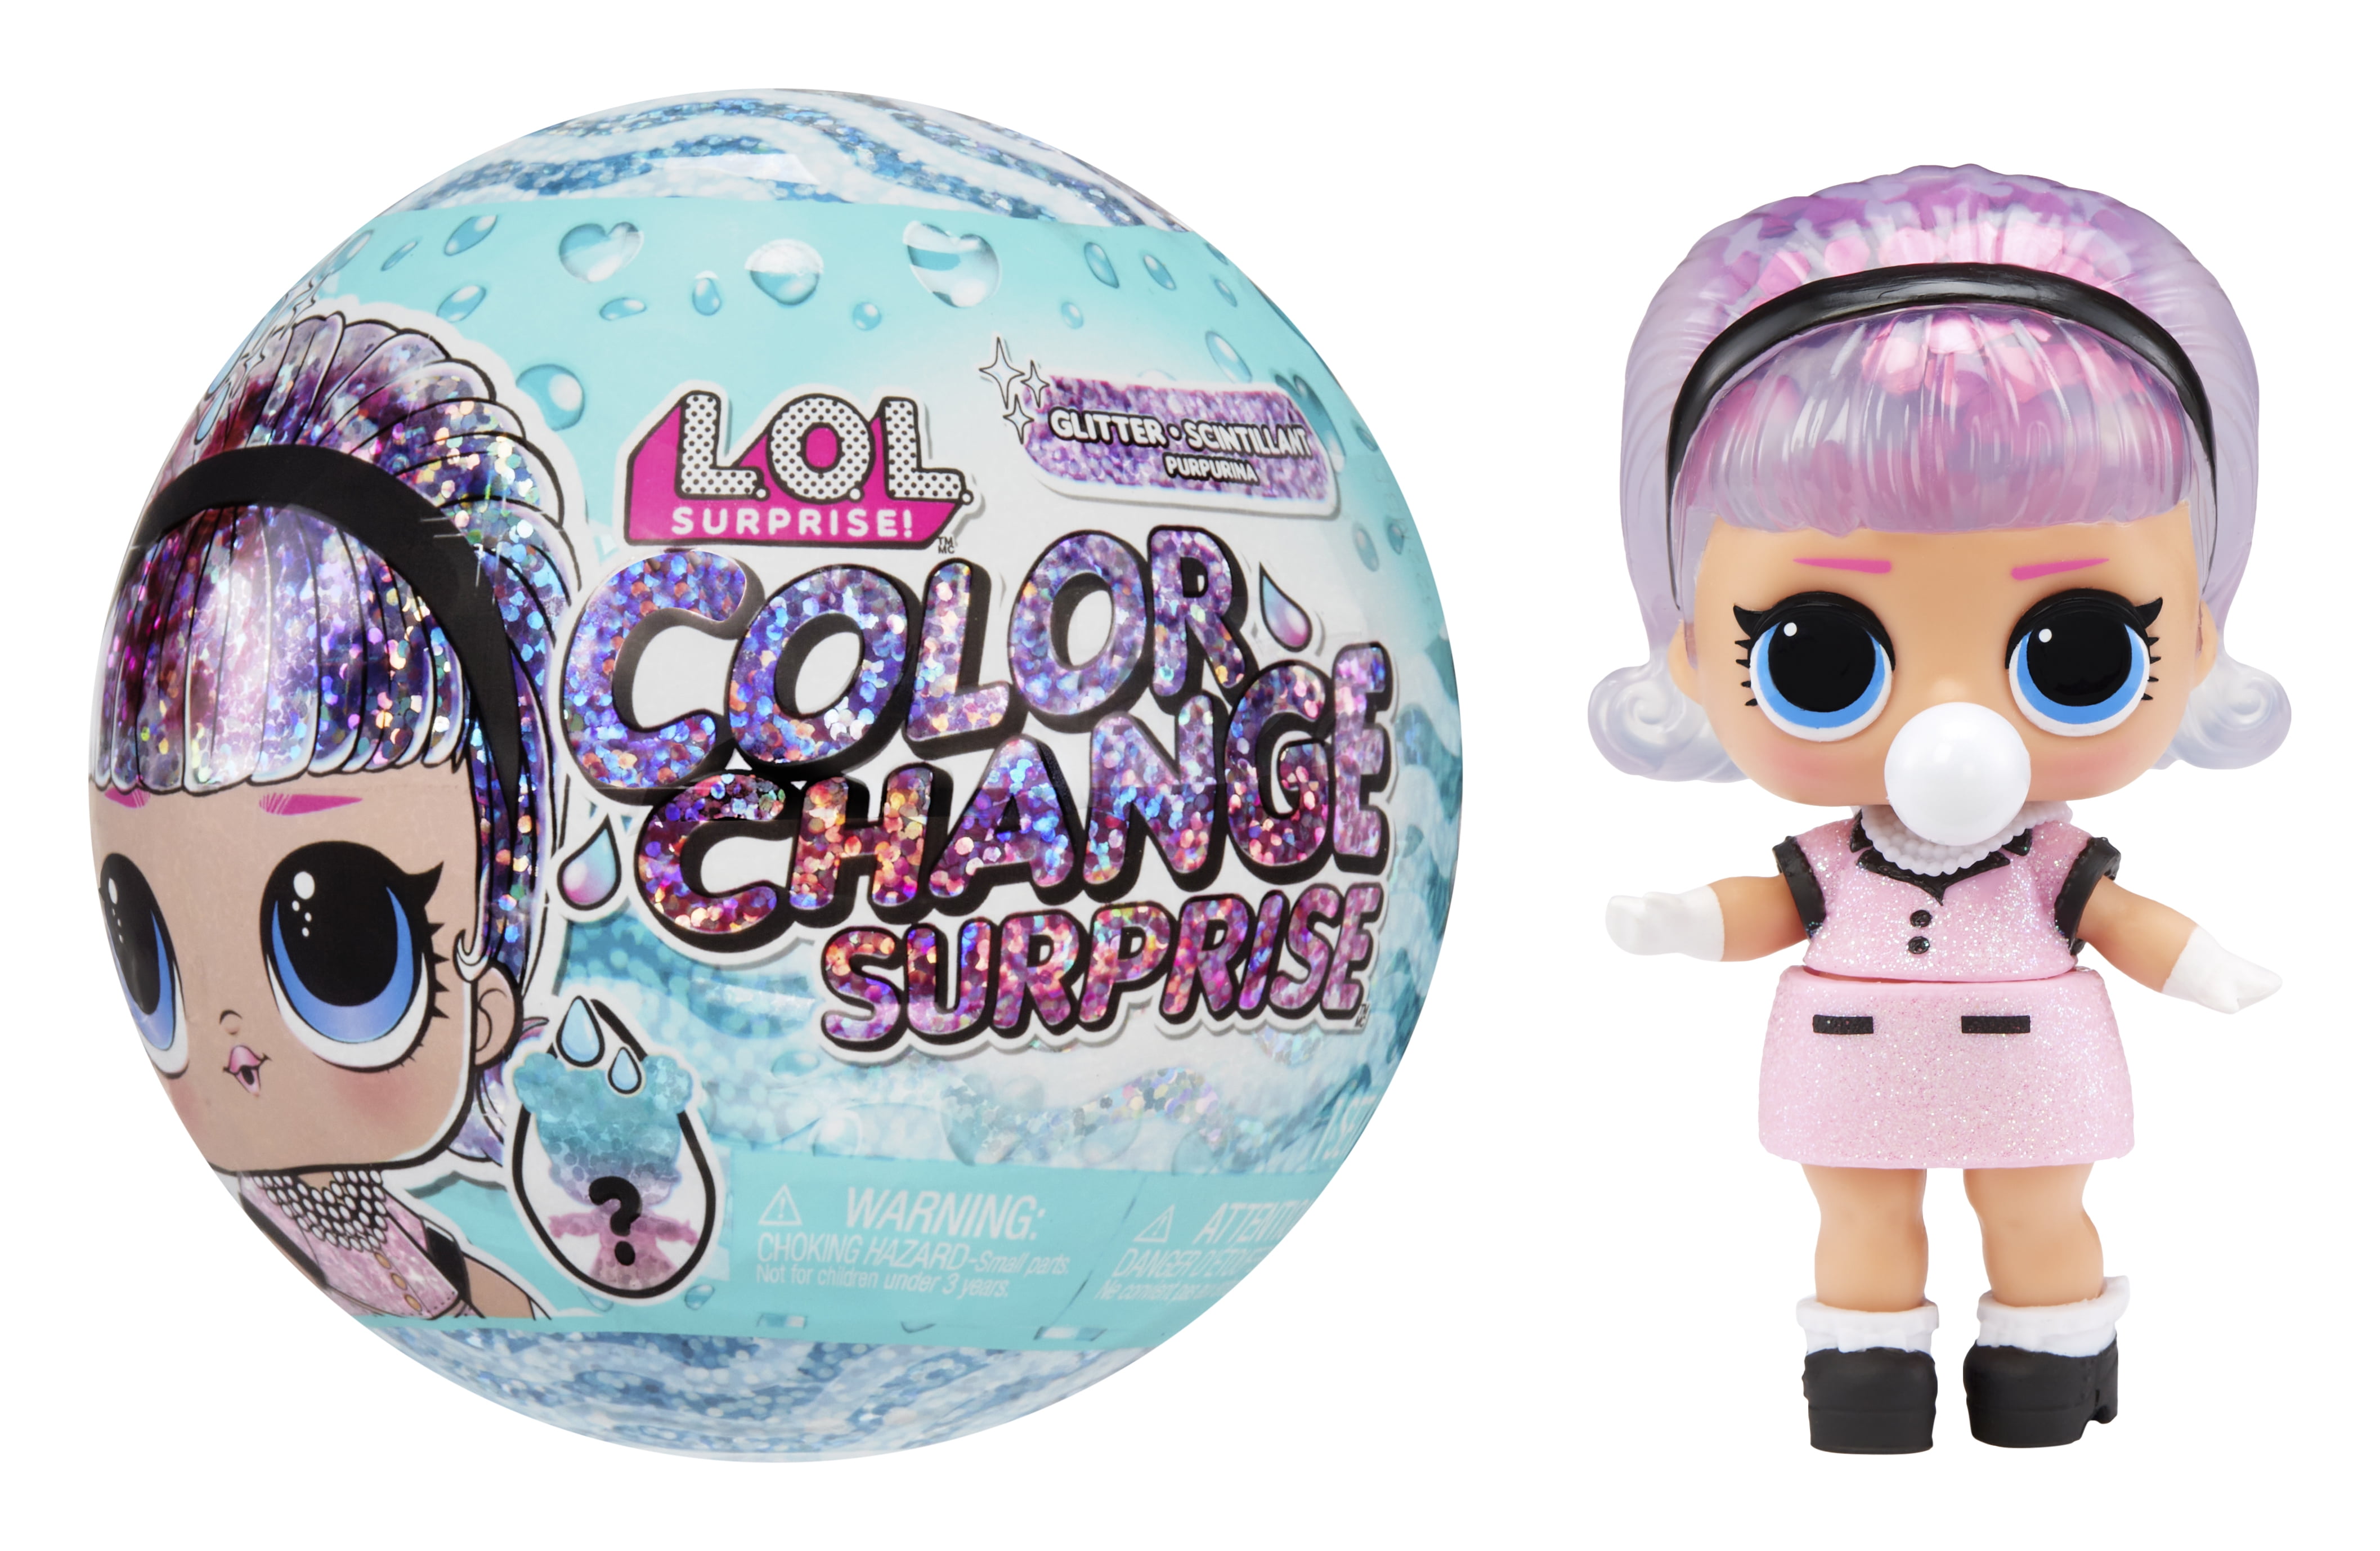 010 SNUGGLE BABE Doll LOL Surprise Sparkle Series Ball NEW see details 